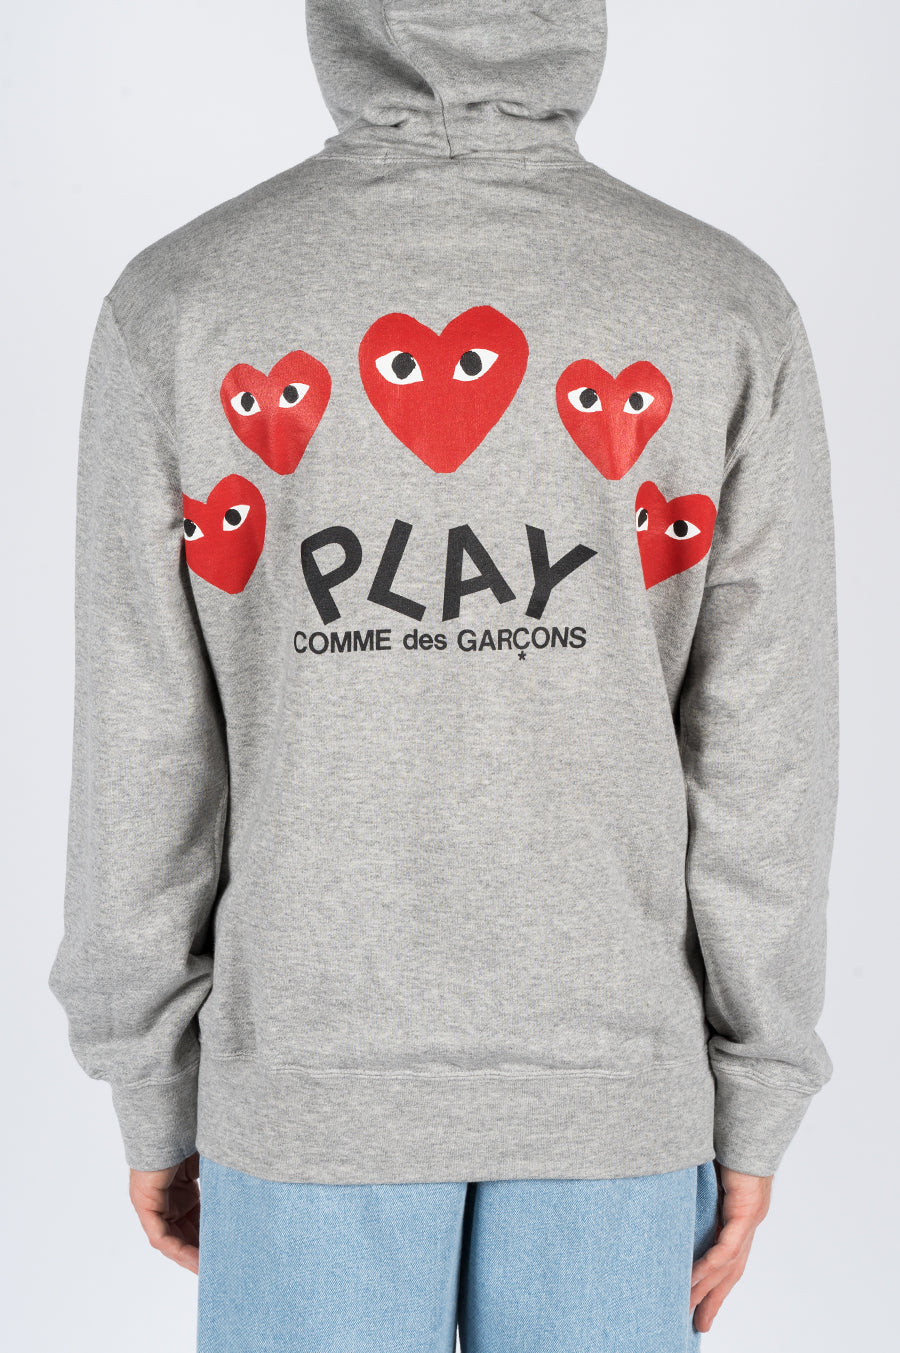 COMME DES GARCONS PLAY HOODIE JACKET LIGHT HEATHER GREY - BLENDS